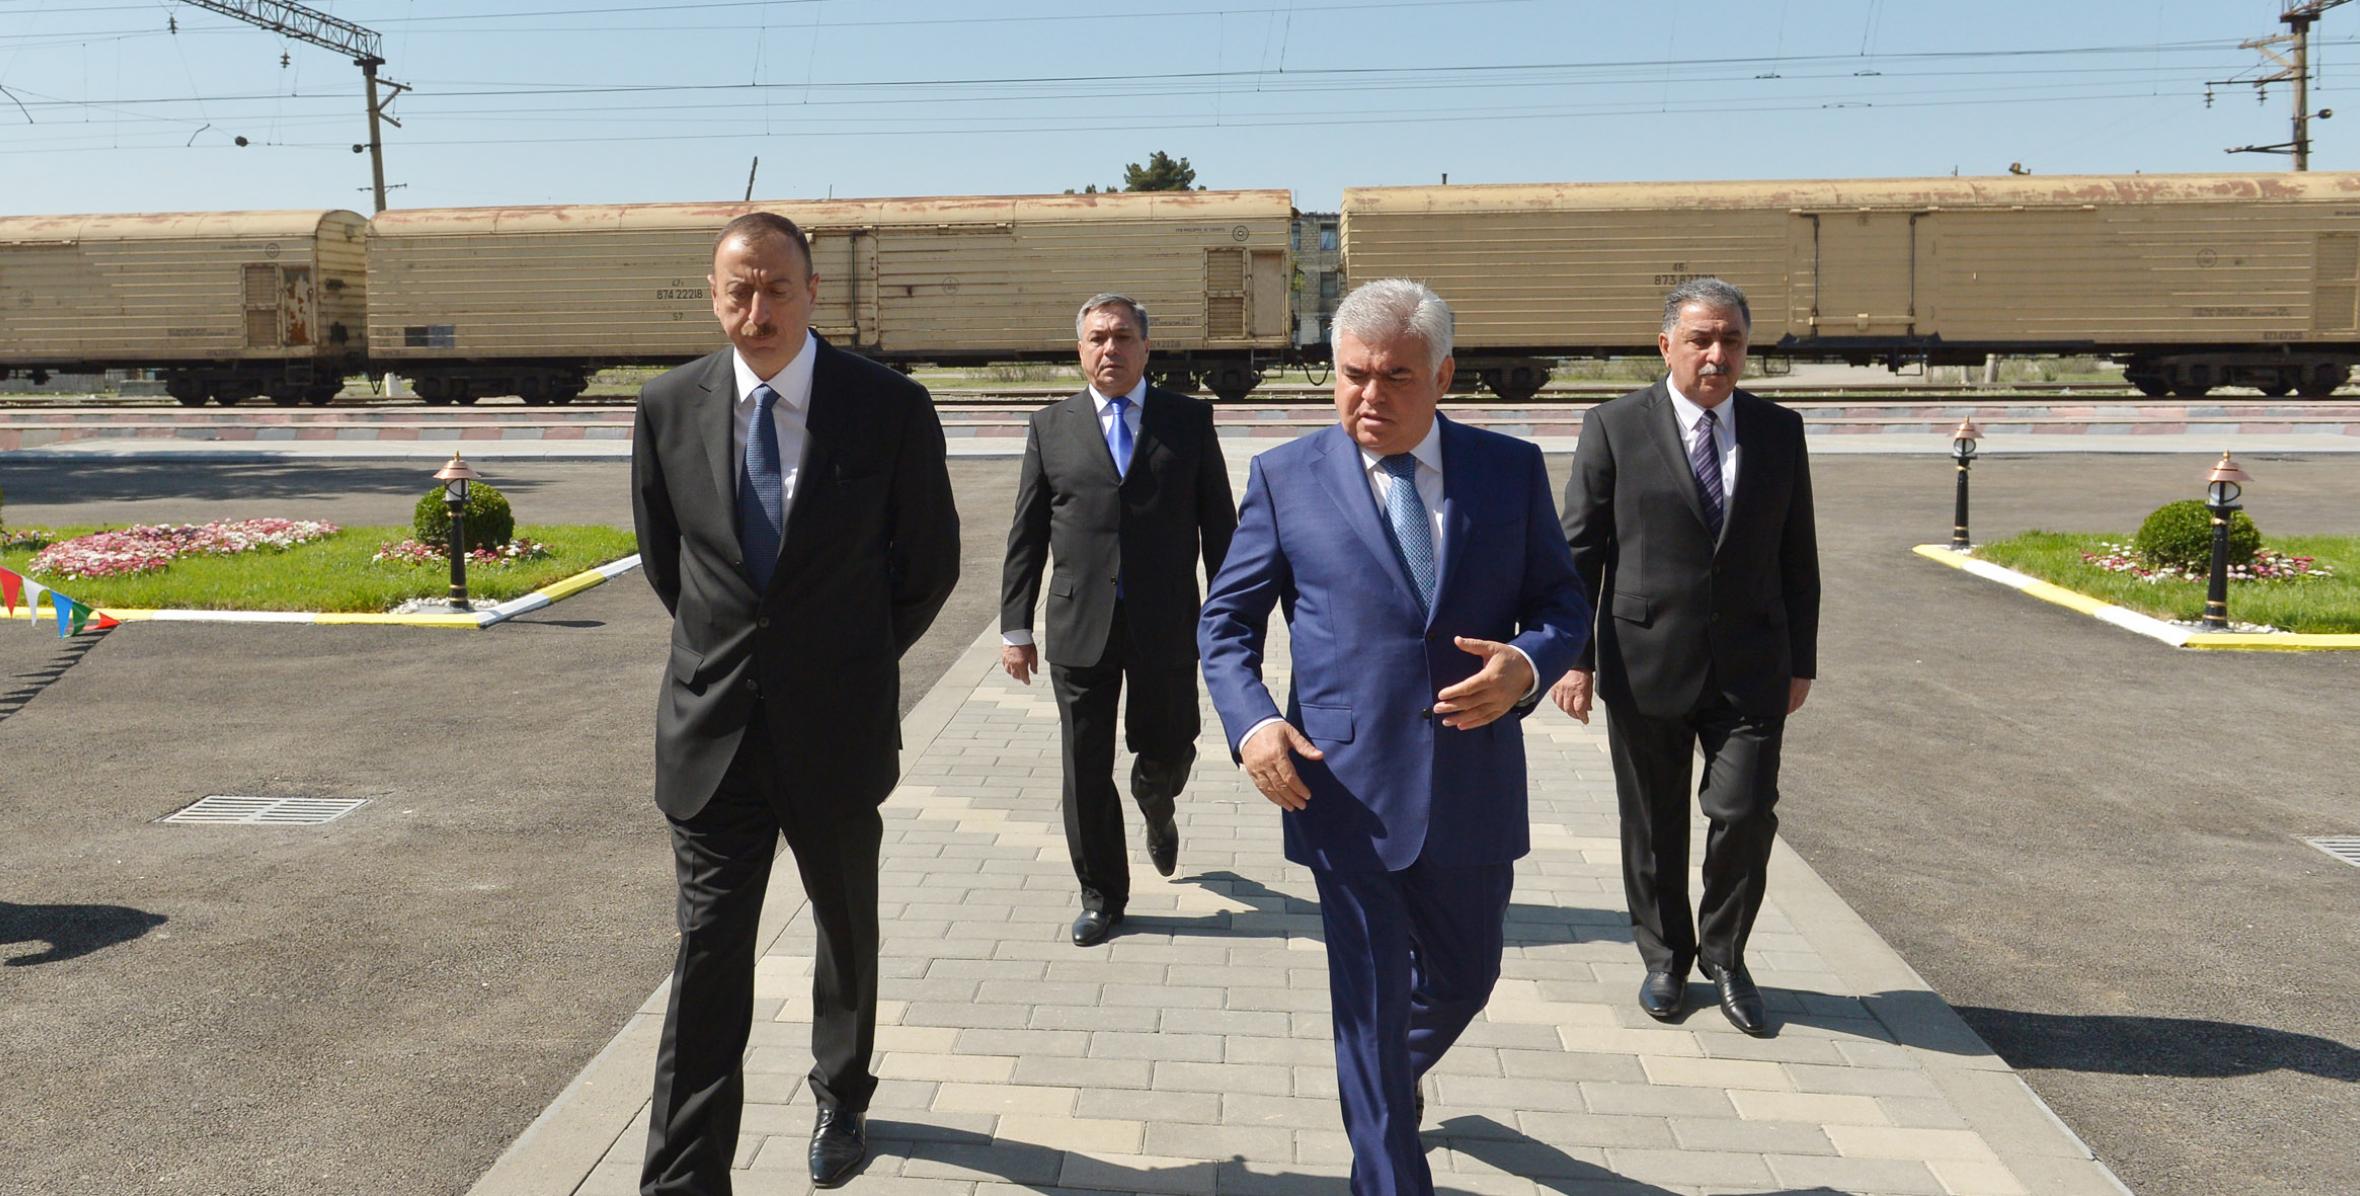 Ilham Aliyev attended the opening ceremony of a new railway station building in Laki